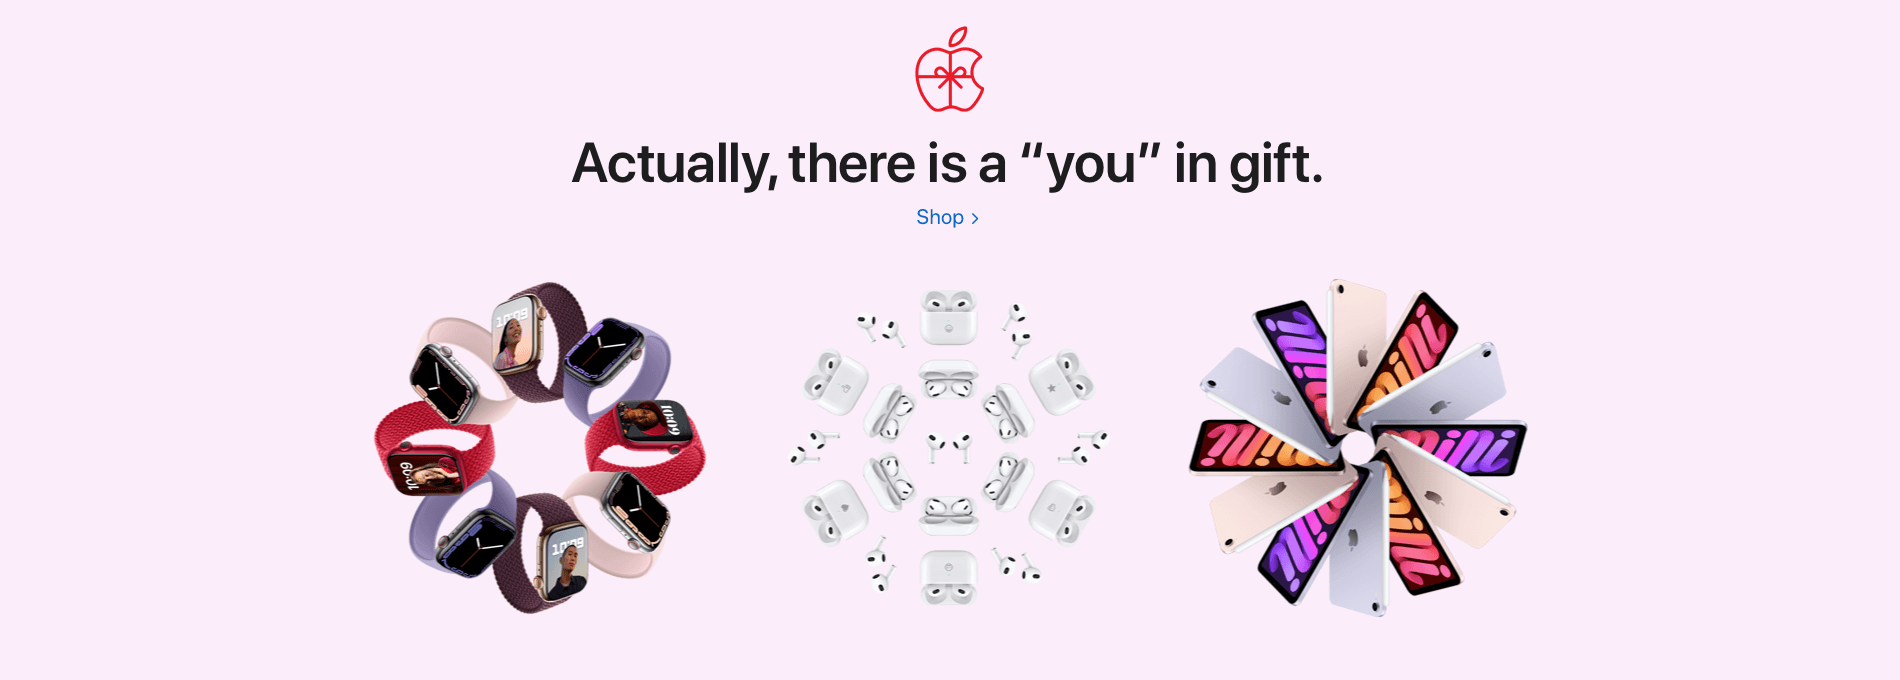 A pink background and the apple logo designed like it's gift wrapped. The phrase says "Actually, there is a "you" in gift. And then beneath are three images of apple products placed in the shape of christmas wreaths. 